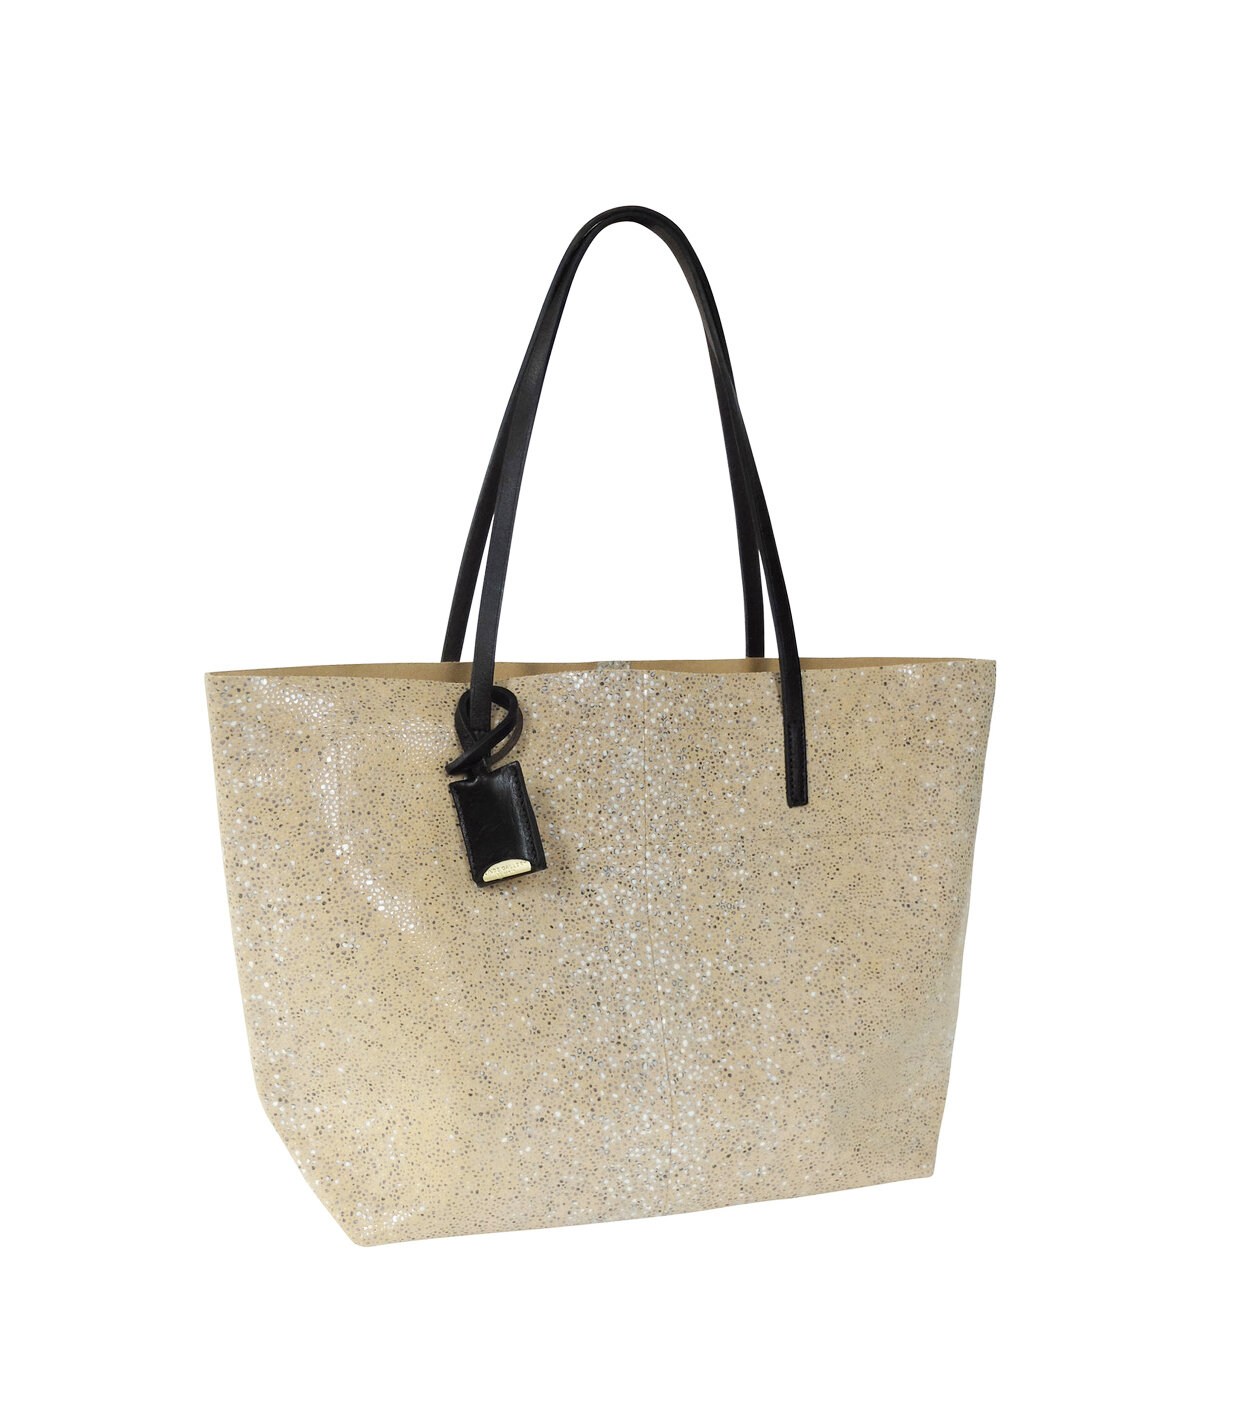 GOUVERNEUR S - GALUCHAT - PRINTED SUEDE - CHAMPAGNE — Linde Gallery St-Barth